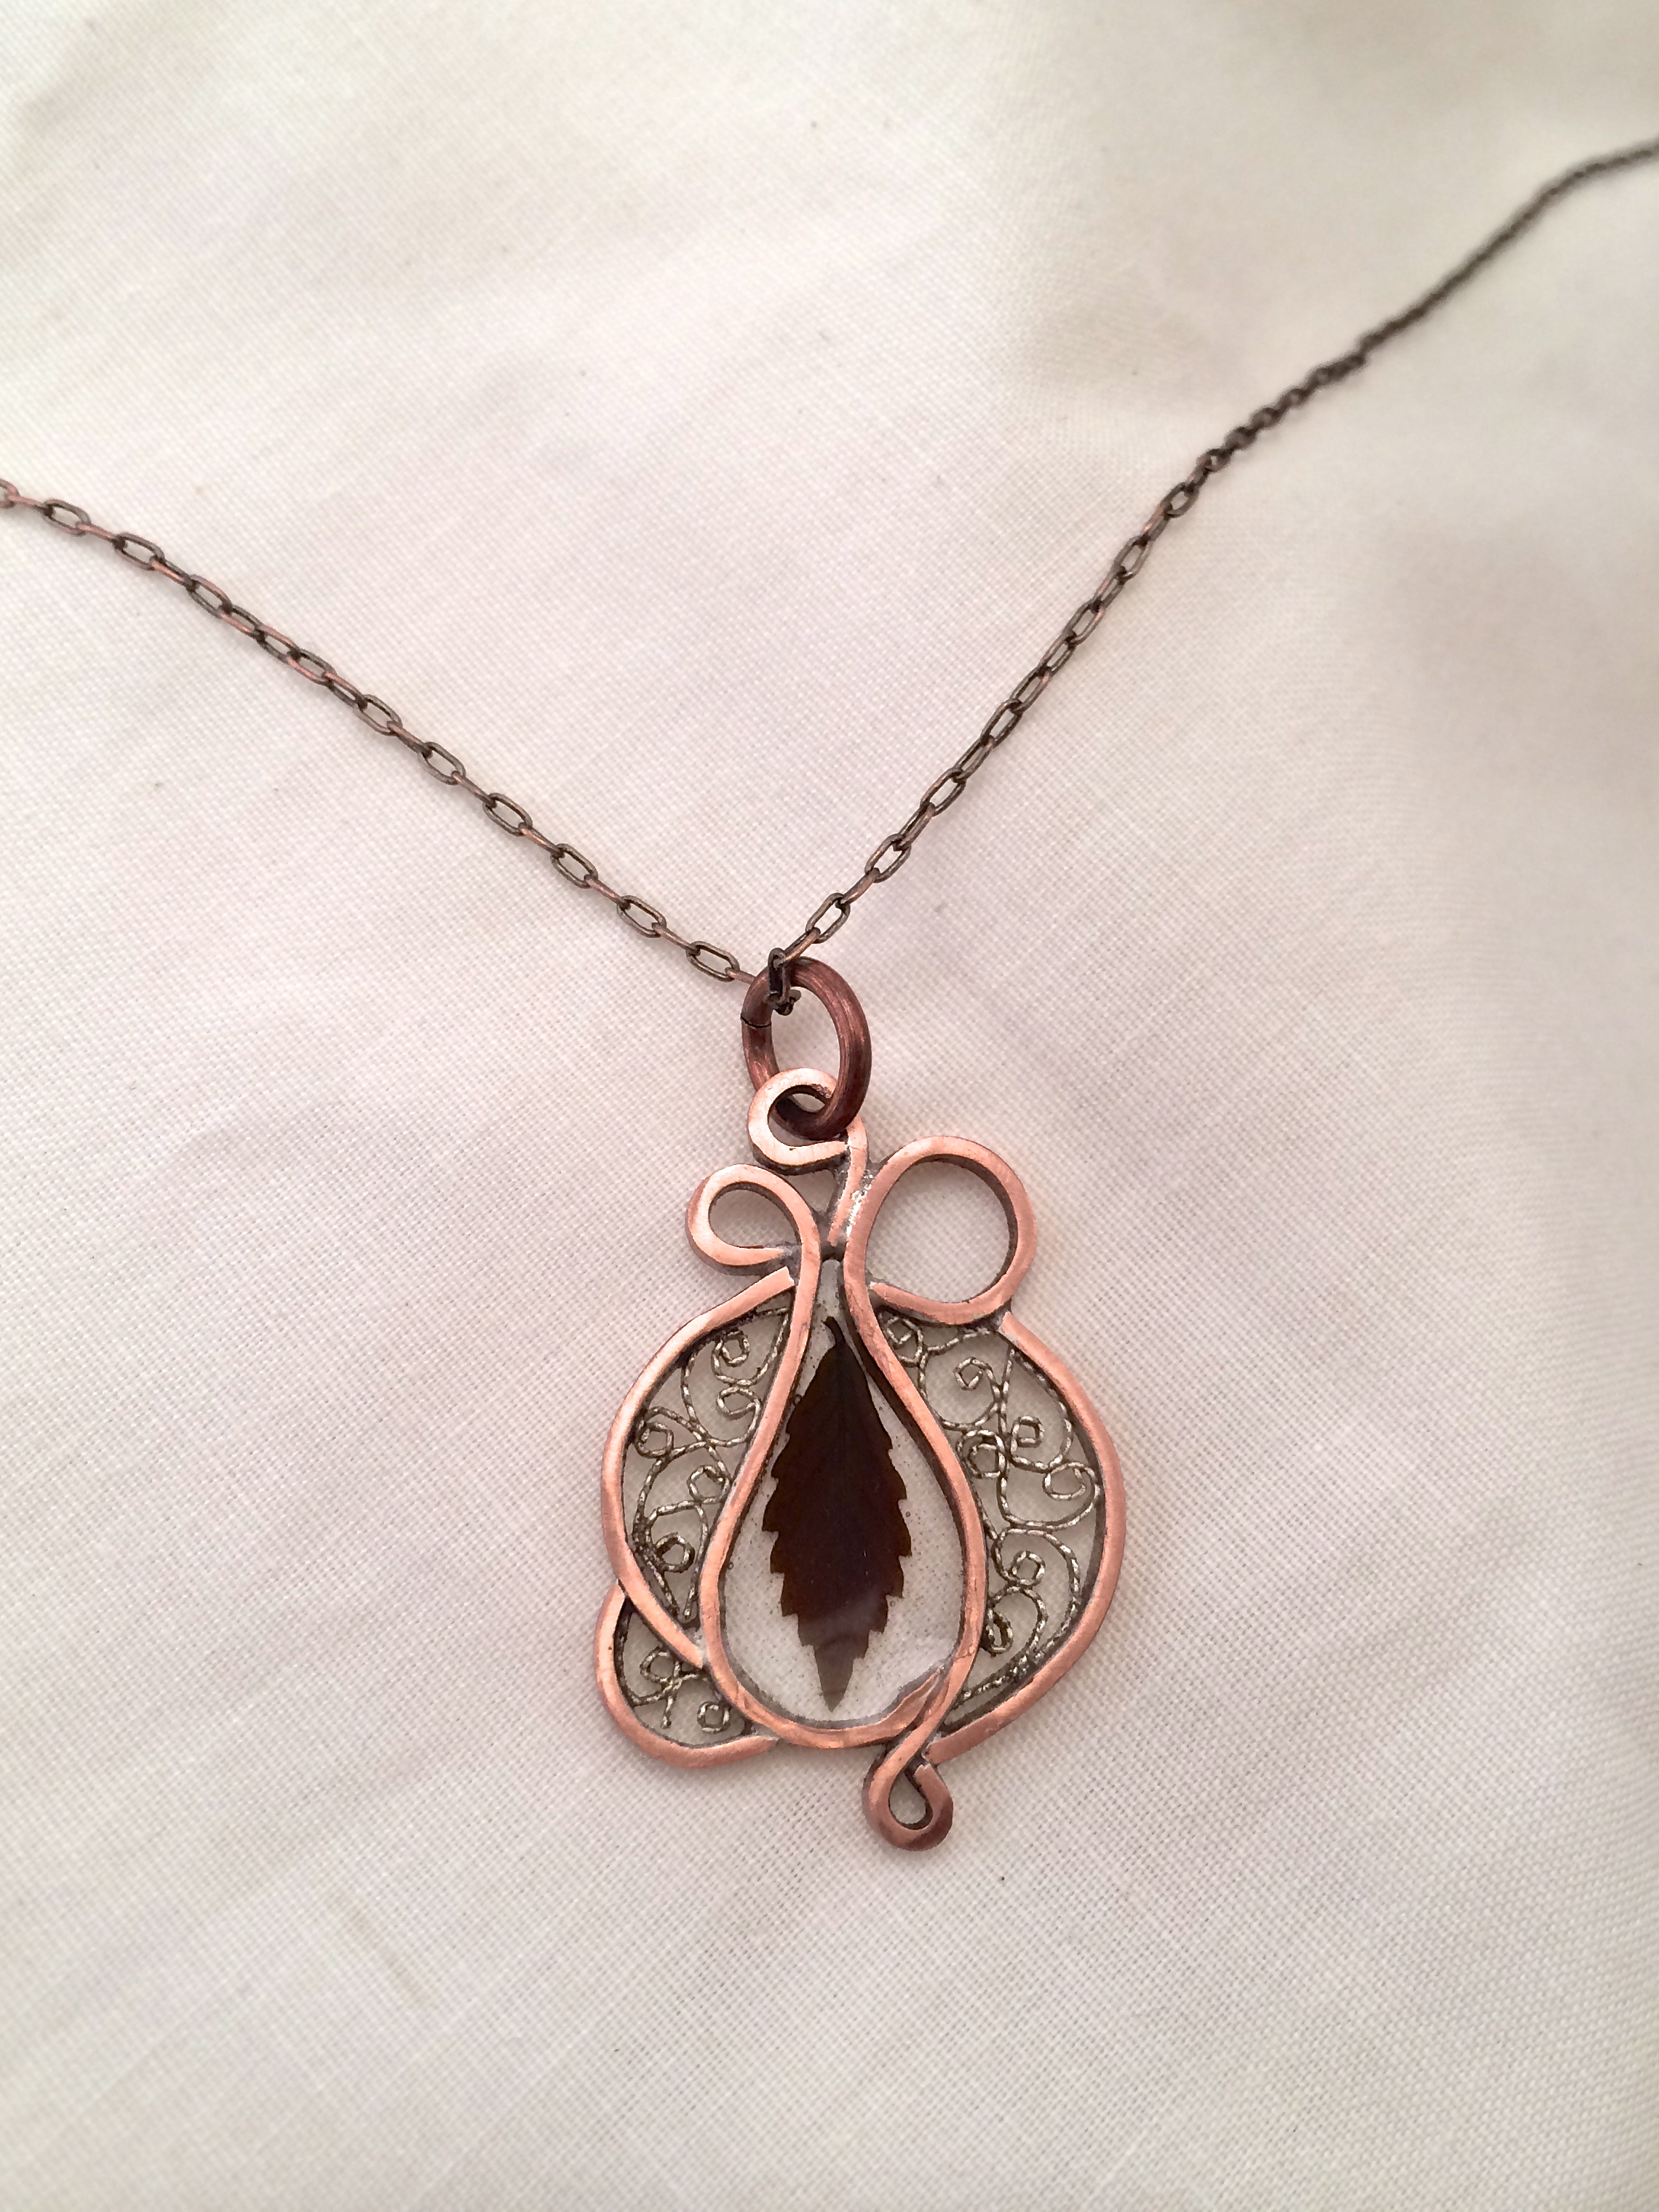 New Work: silver and copper filigree | metalledwith